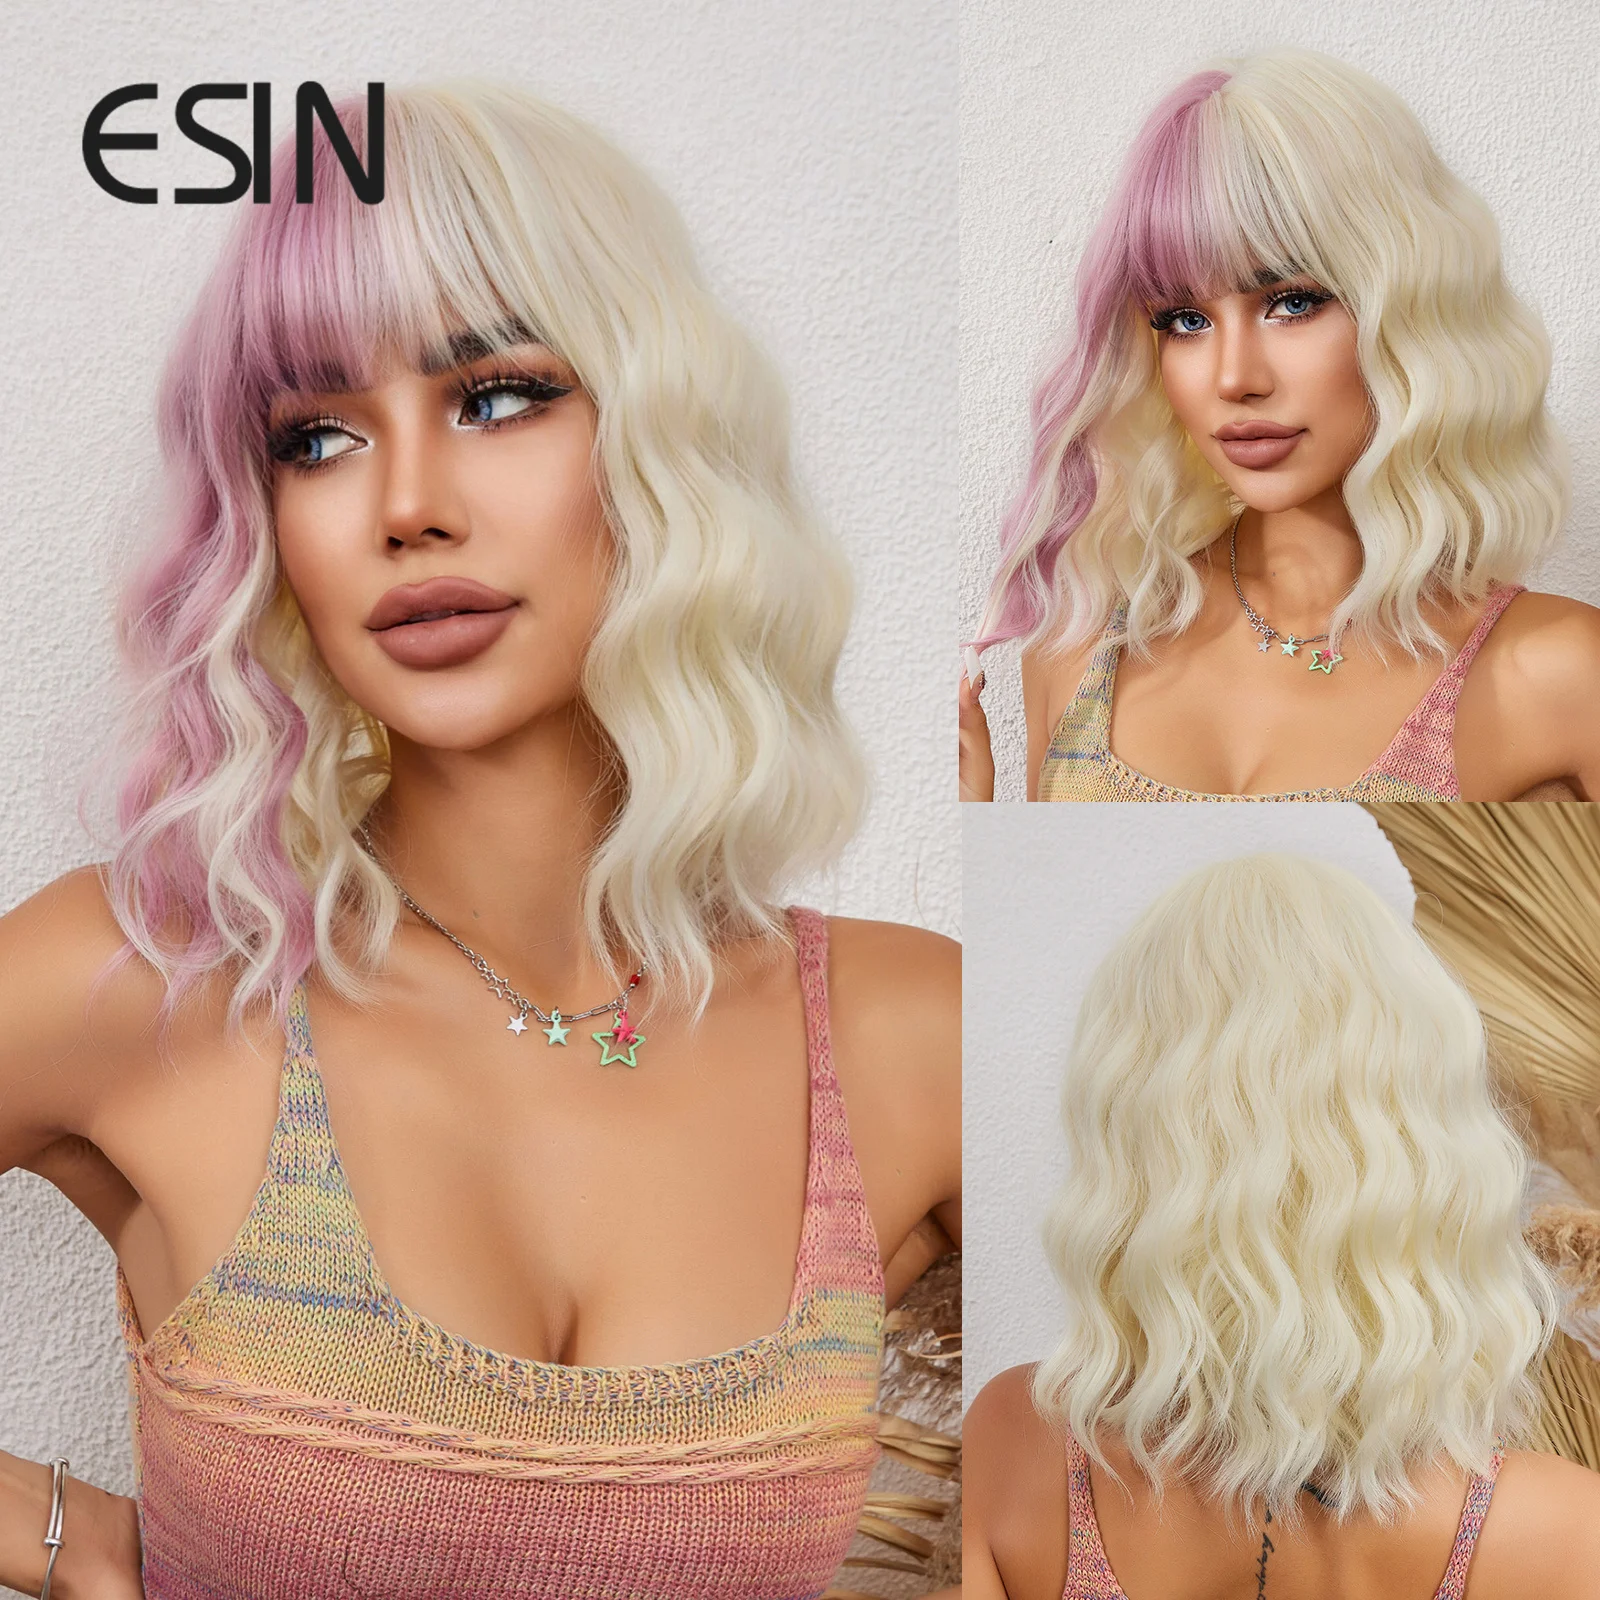 

ESIN Synthetic Blonde Mixed Pink Bob Wigs Medium Long Loose Body Wave Wig with Bangs Cosplay Daily Natural Wigs for Women